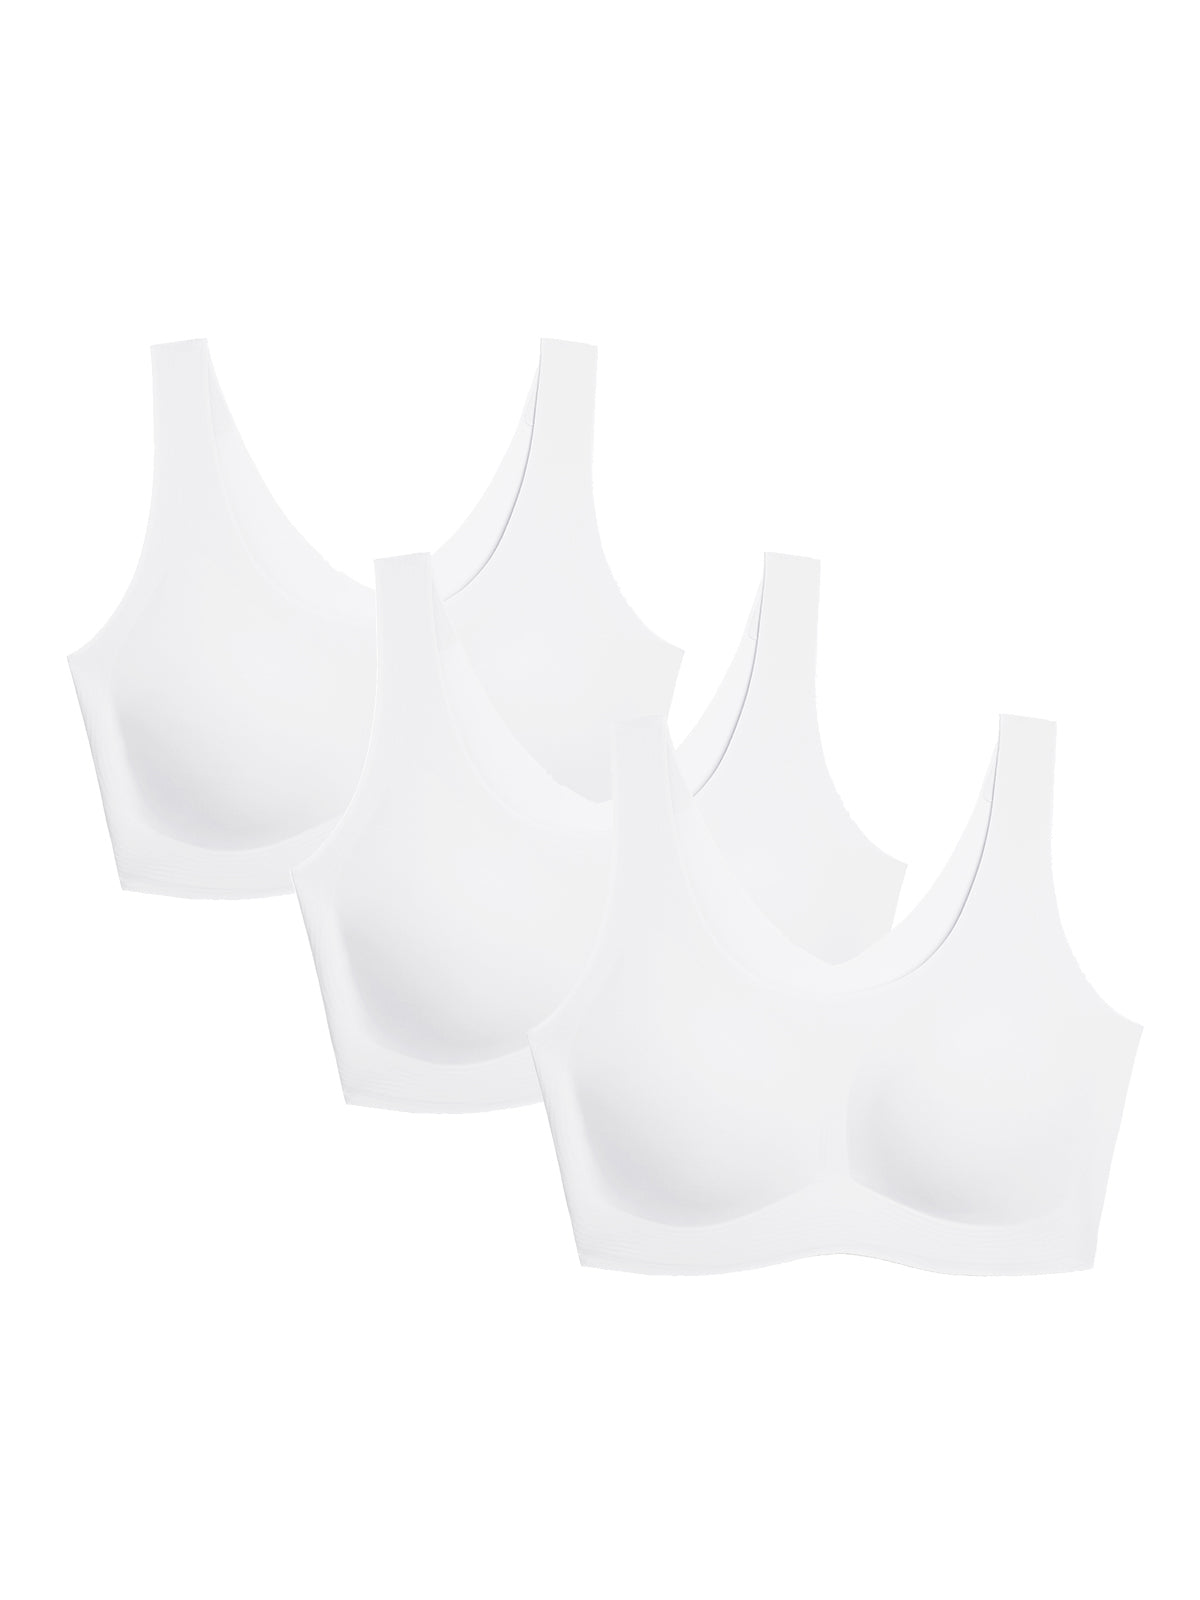 Flash Sale | 24H Comfort One Size Classic Wireless Bra Fixed Pad Kit of 3